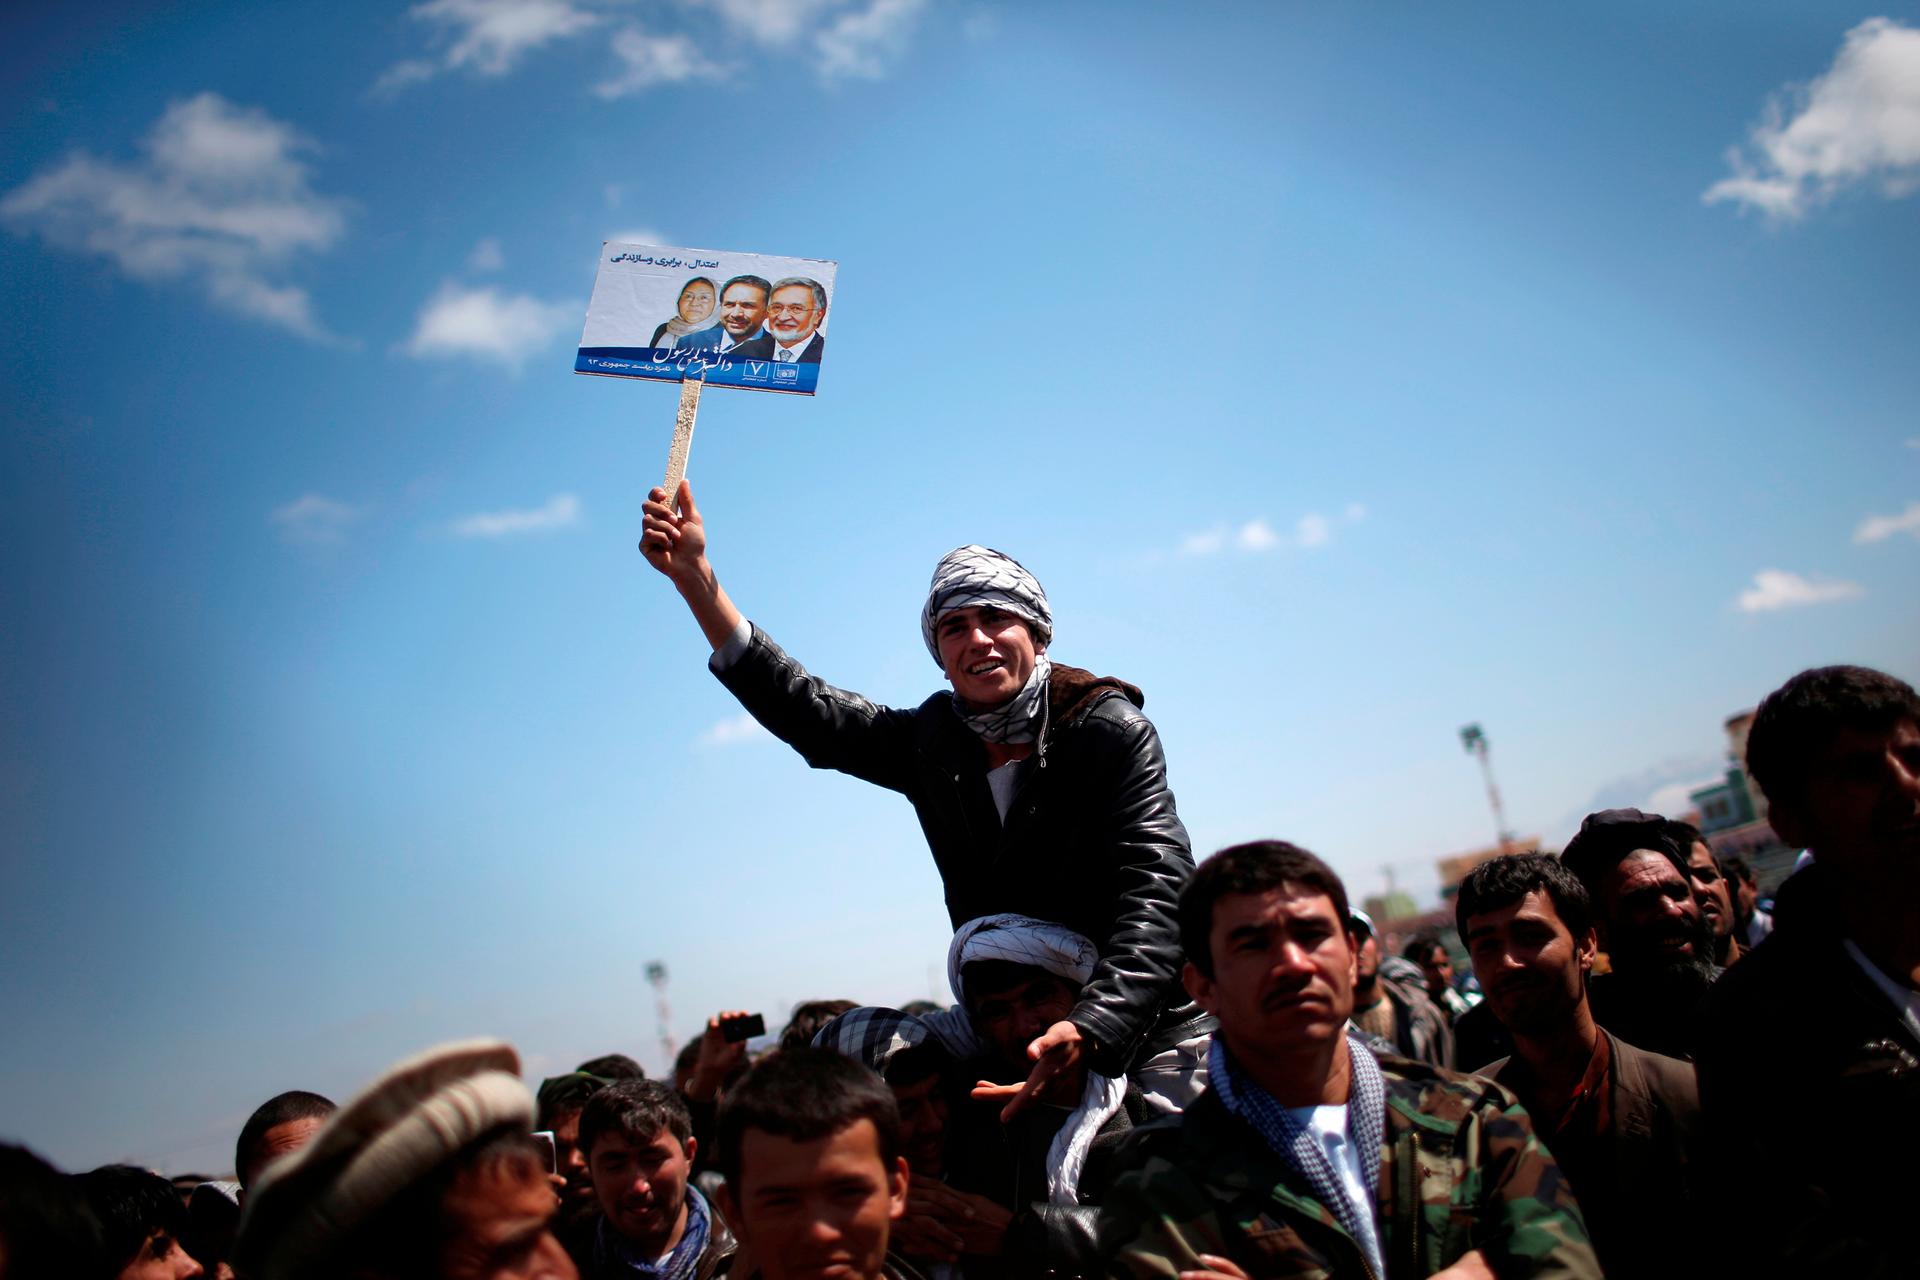 A supporter of Afghan presidential candidate Zalmai Rassoul holds his picture during an election rally in the city of Mazar-i-Shariff, in northern Afghanistan on March 27, 2014. The Afghan presidential election will be held on April 5.